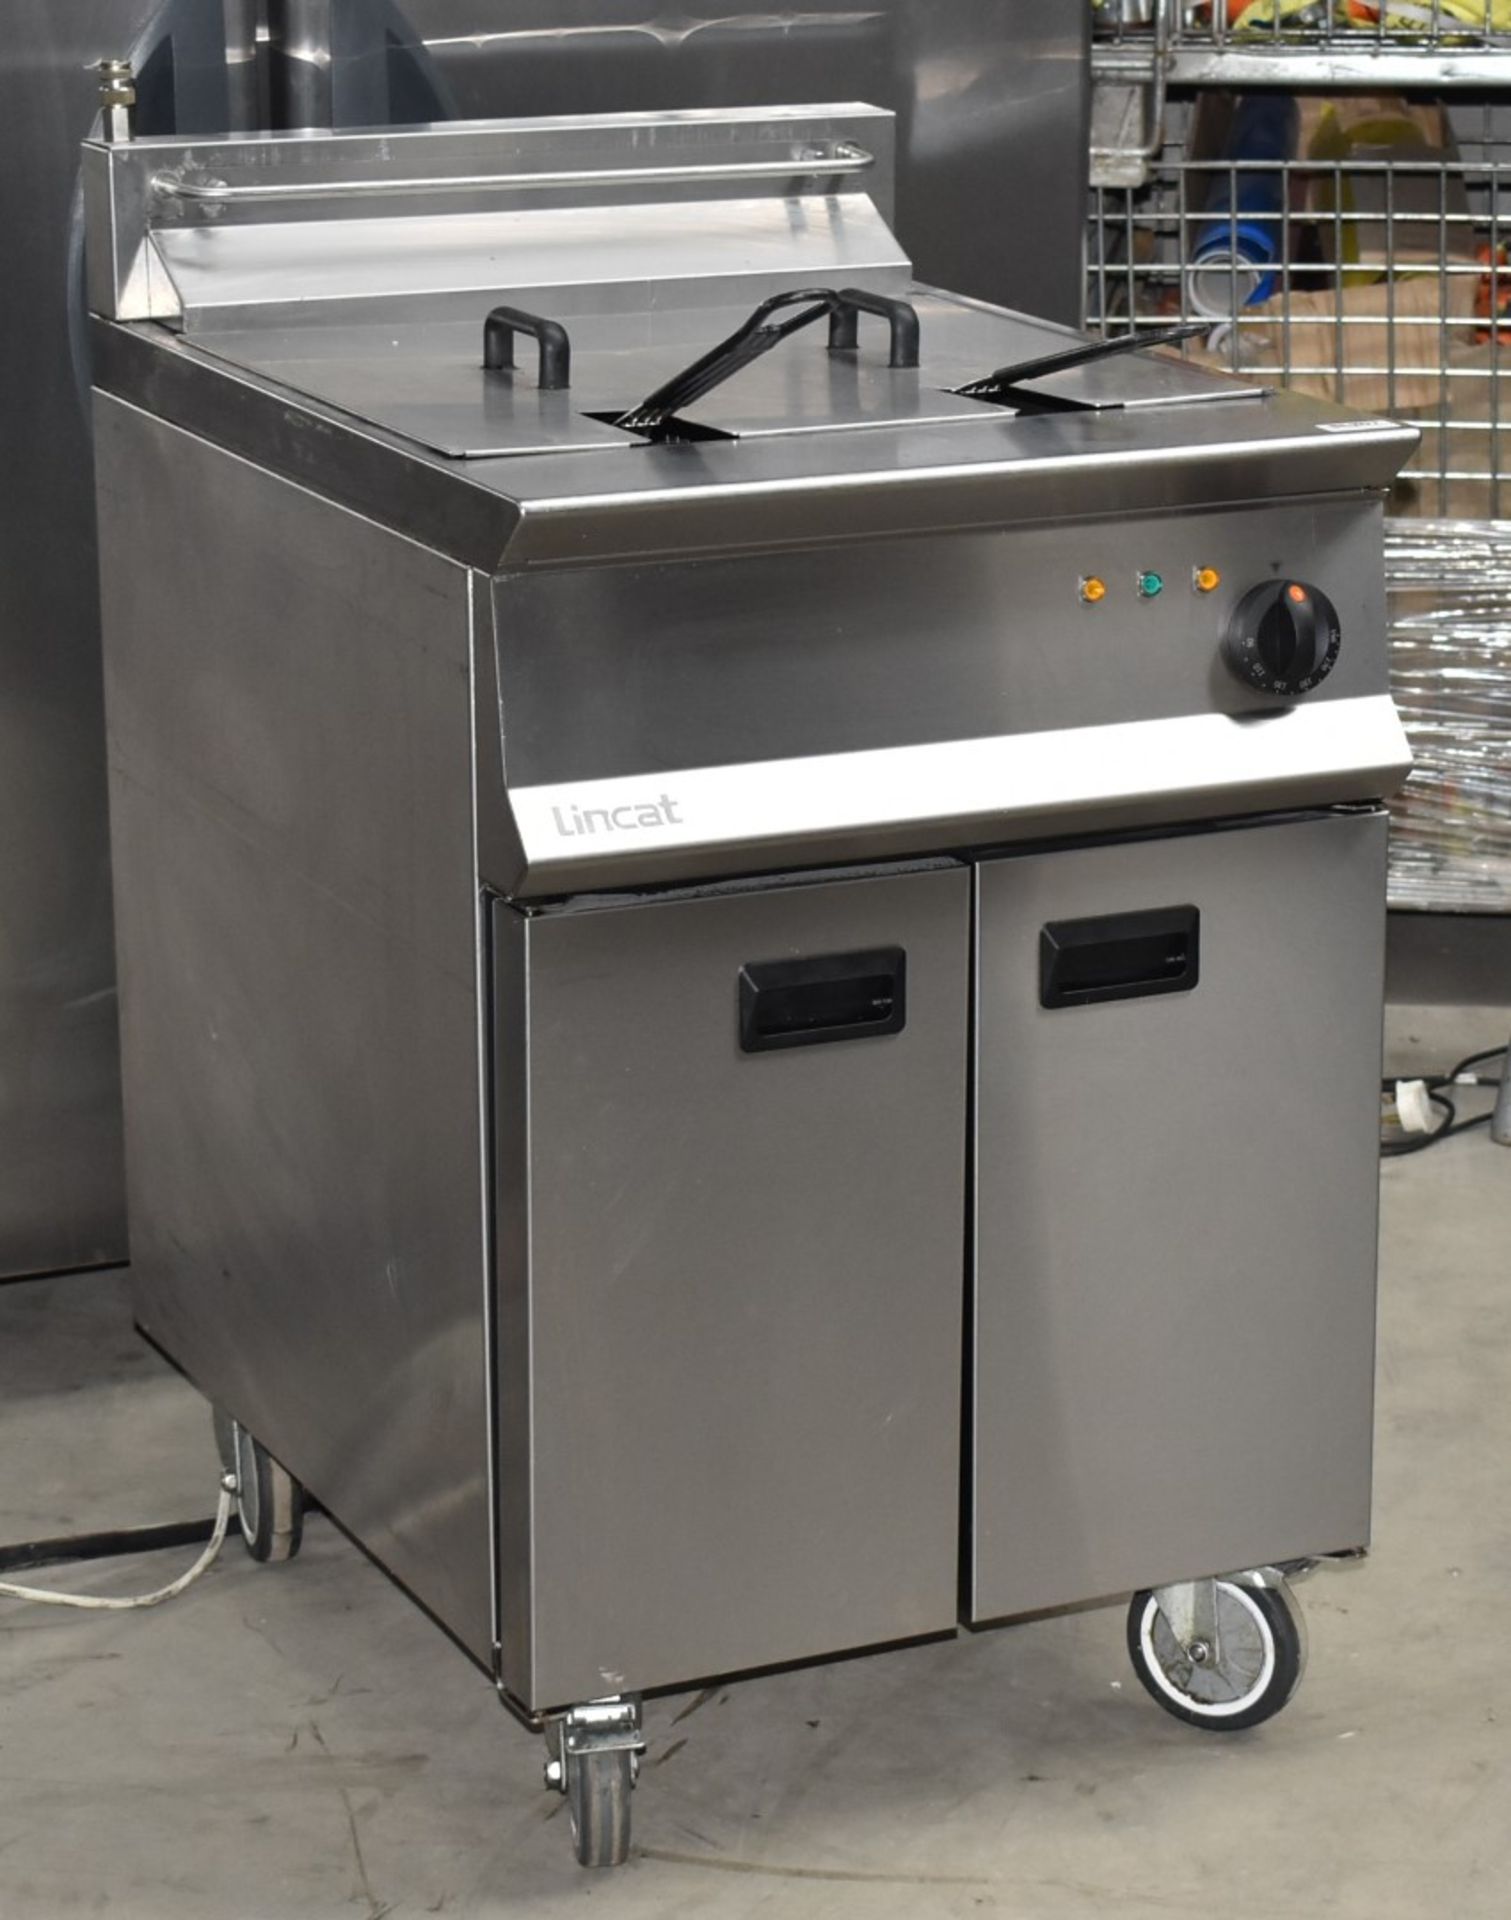 1 x Lincat Opus 800 OE8108 Single Tank Electric Fryer With Filtration - 37L Tank With Two - Image 14 of 17